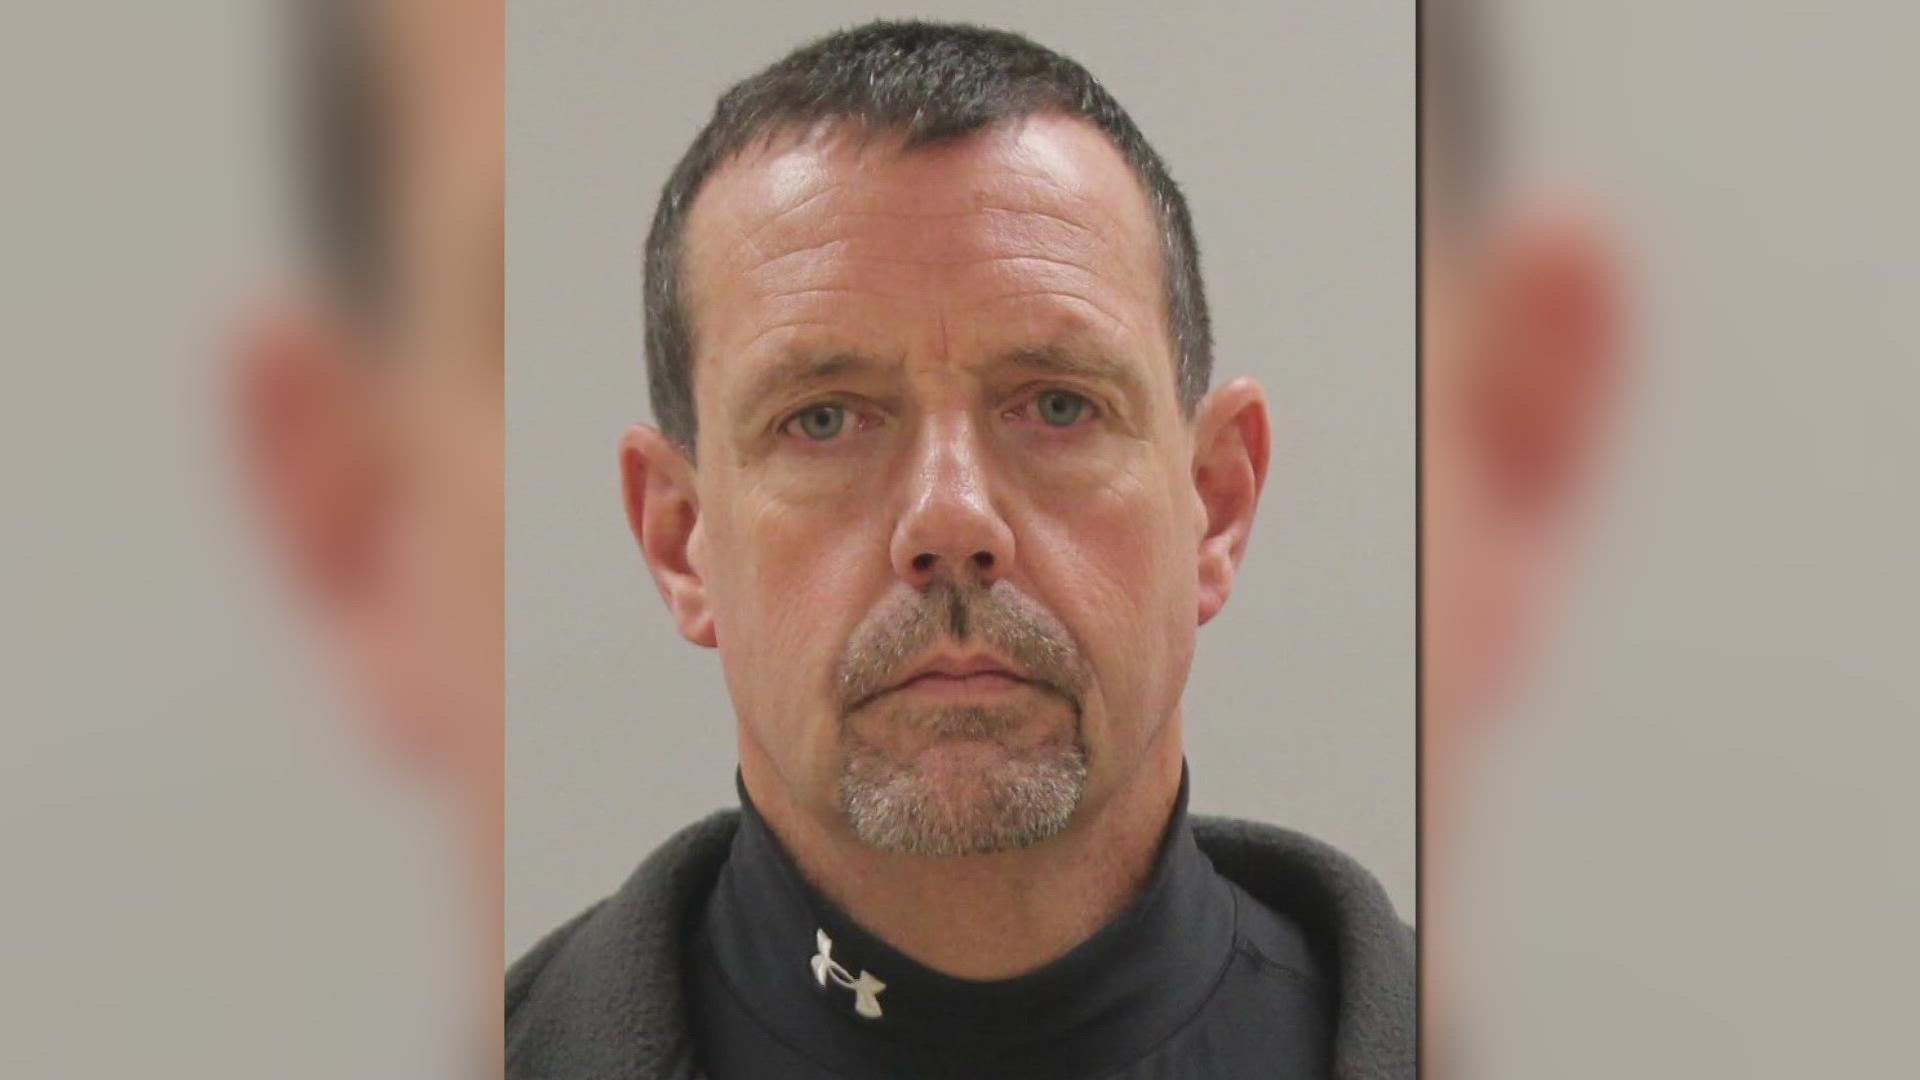 Court docs reveal former security guard accused of spying on woman pumping breast milk wzzm13